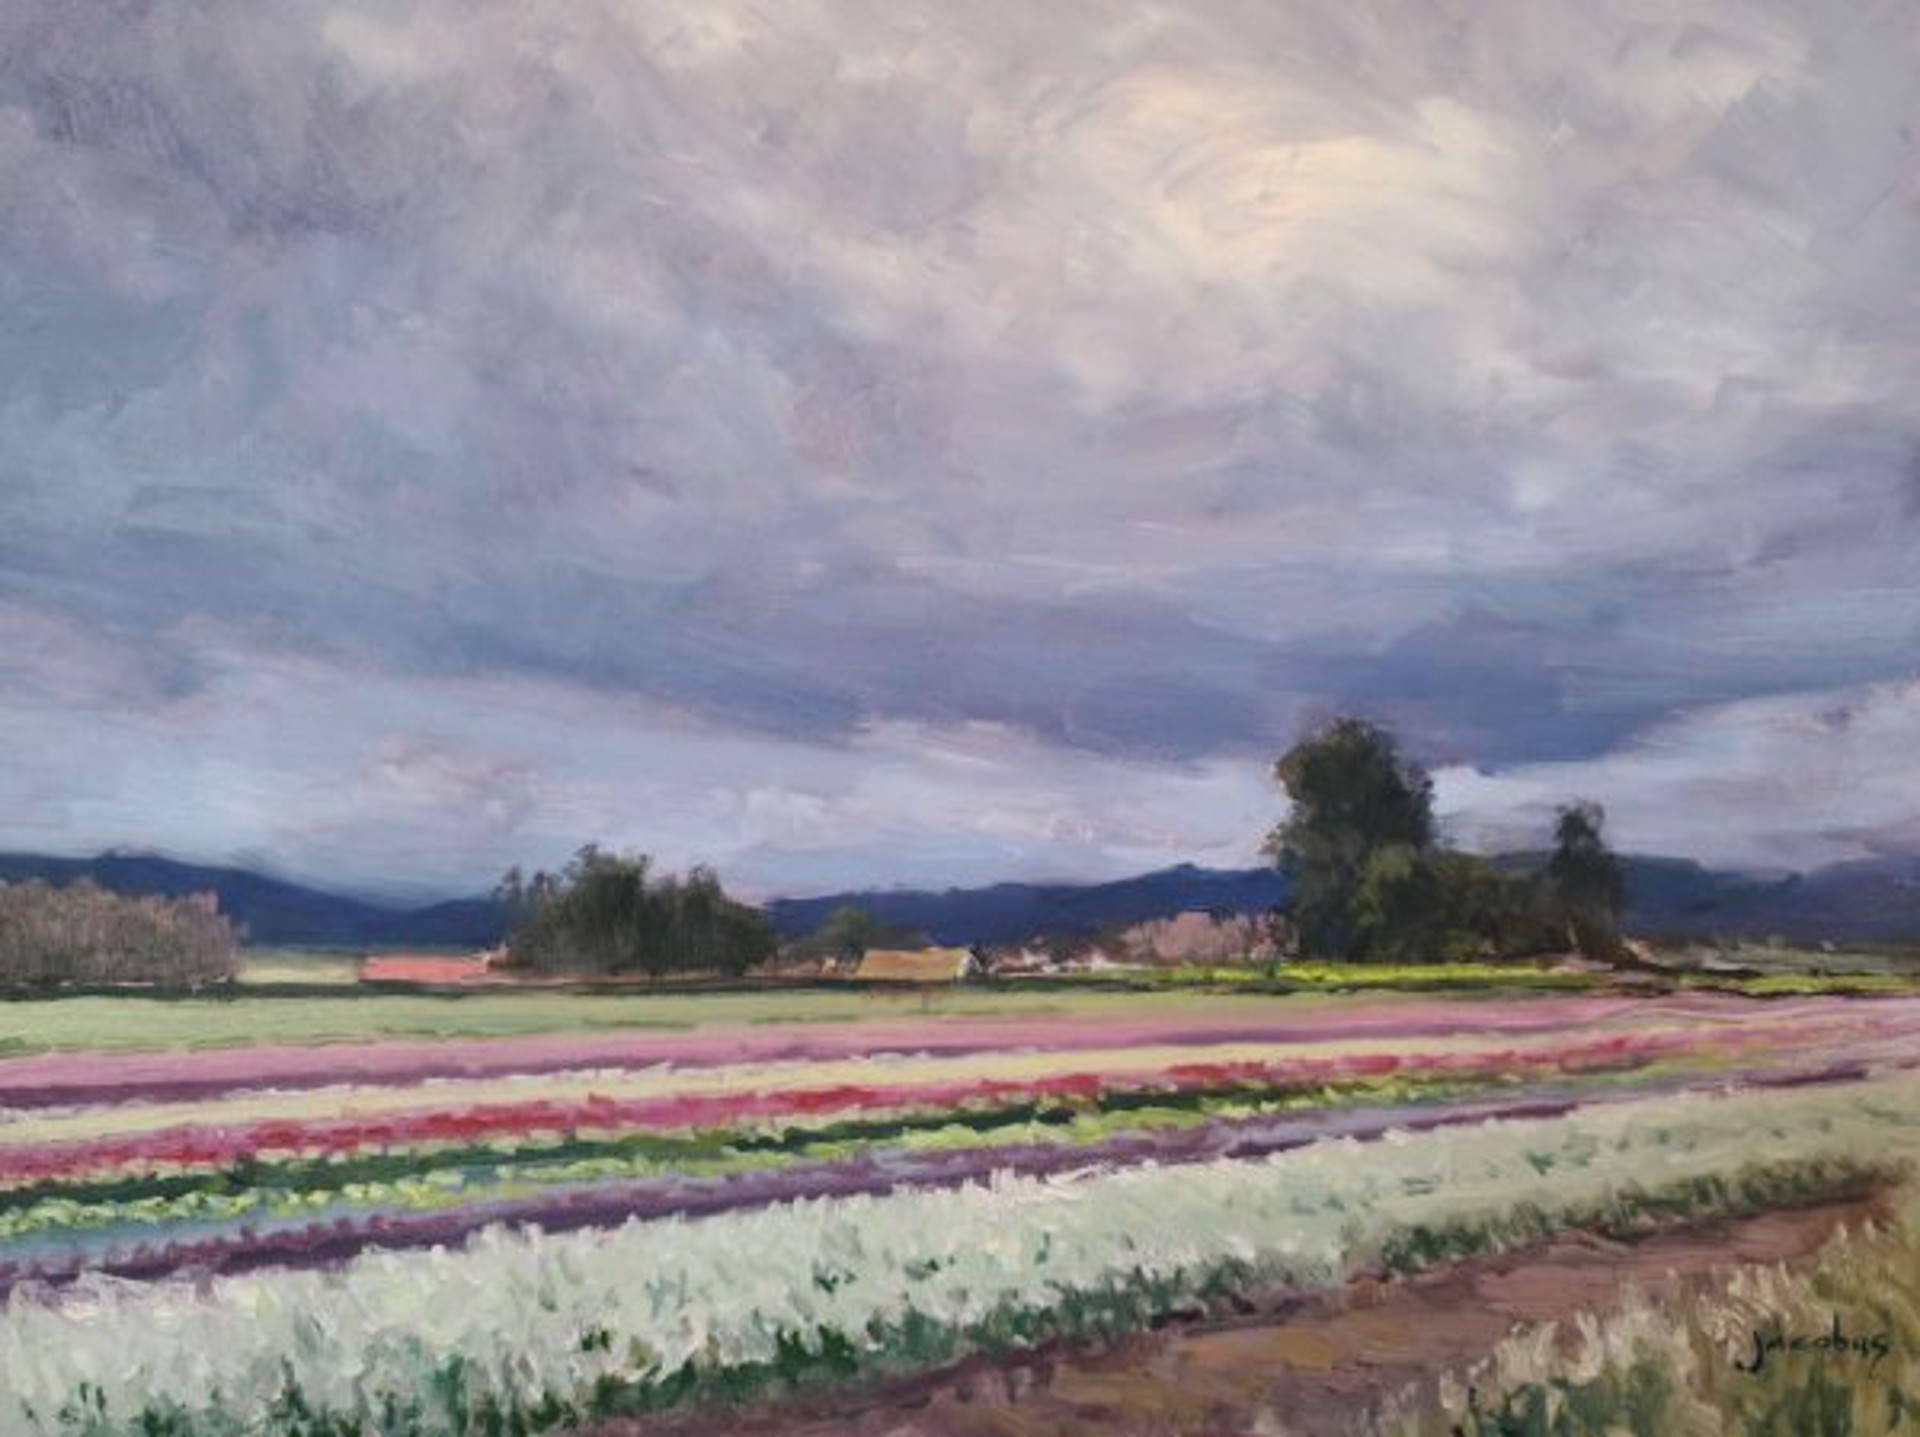 Storm Clouds Over Flower Fields by Jacobus Baas